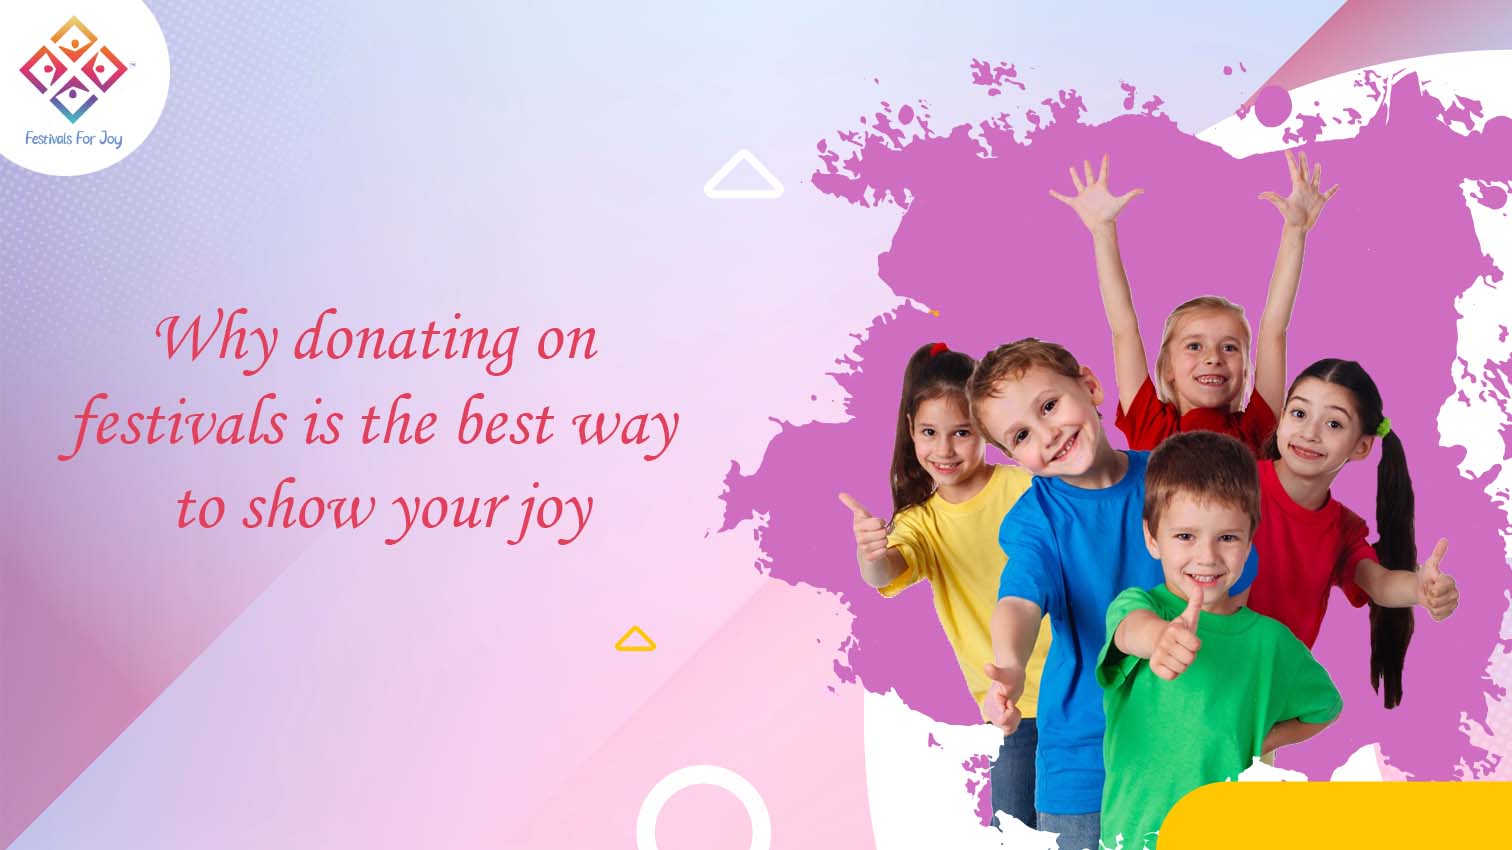 festivalsforjoy-Why-Donating-on-Festivals-is-the-Best-Way-to-Show-Your-Joy